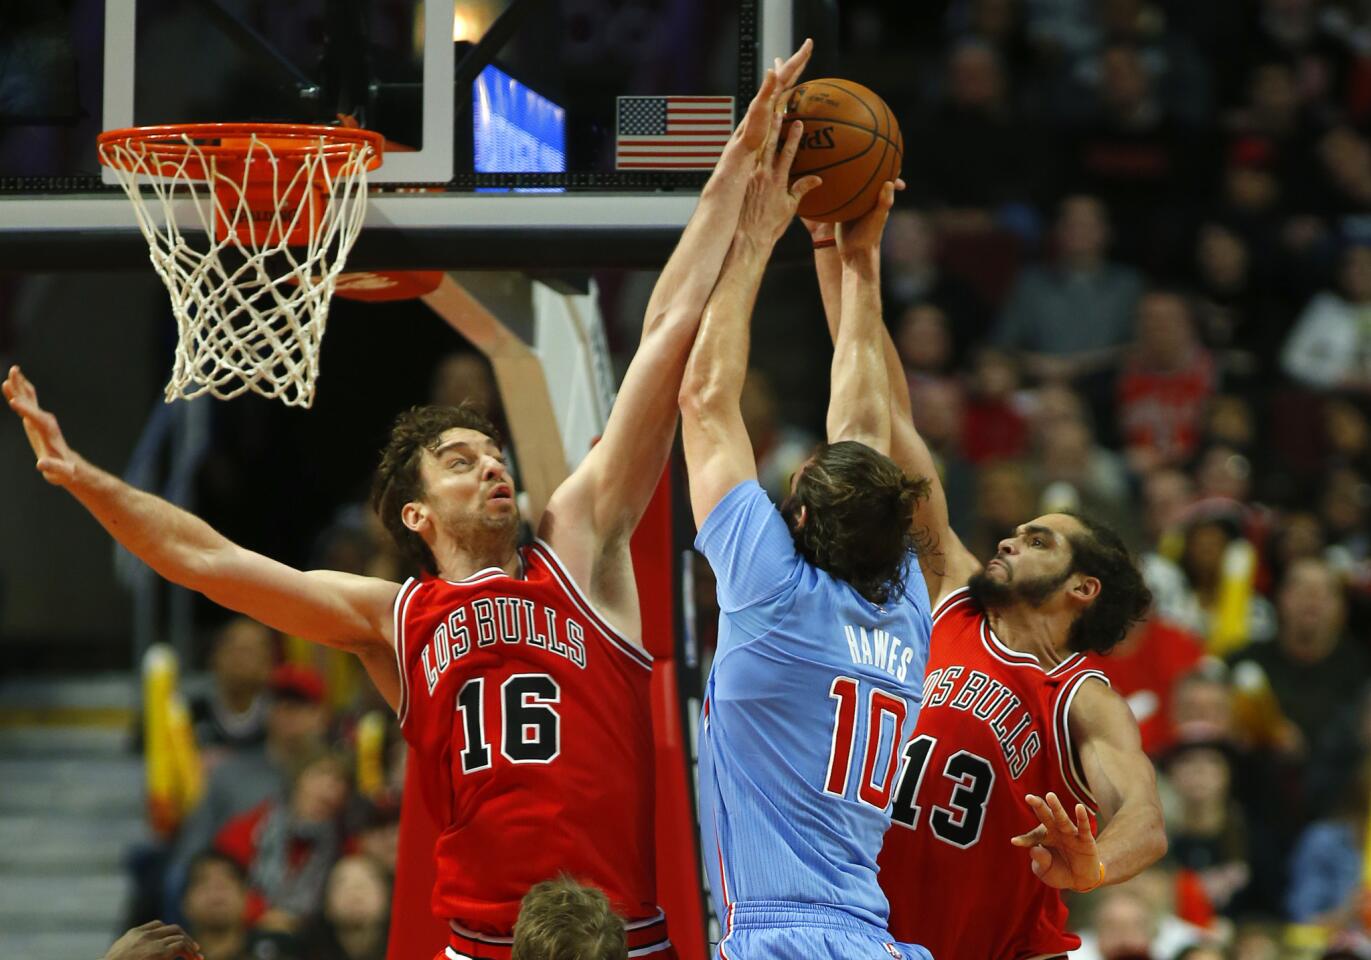 Clippers center Spencer Hawes tries to score against the defense of Bulls big men Pau Gasol (16) and Joakim Noah (13) in the second half.